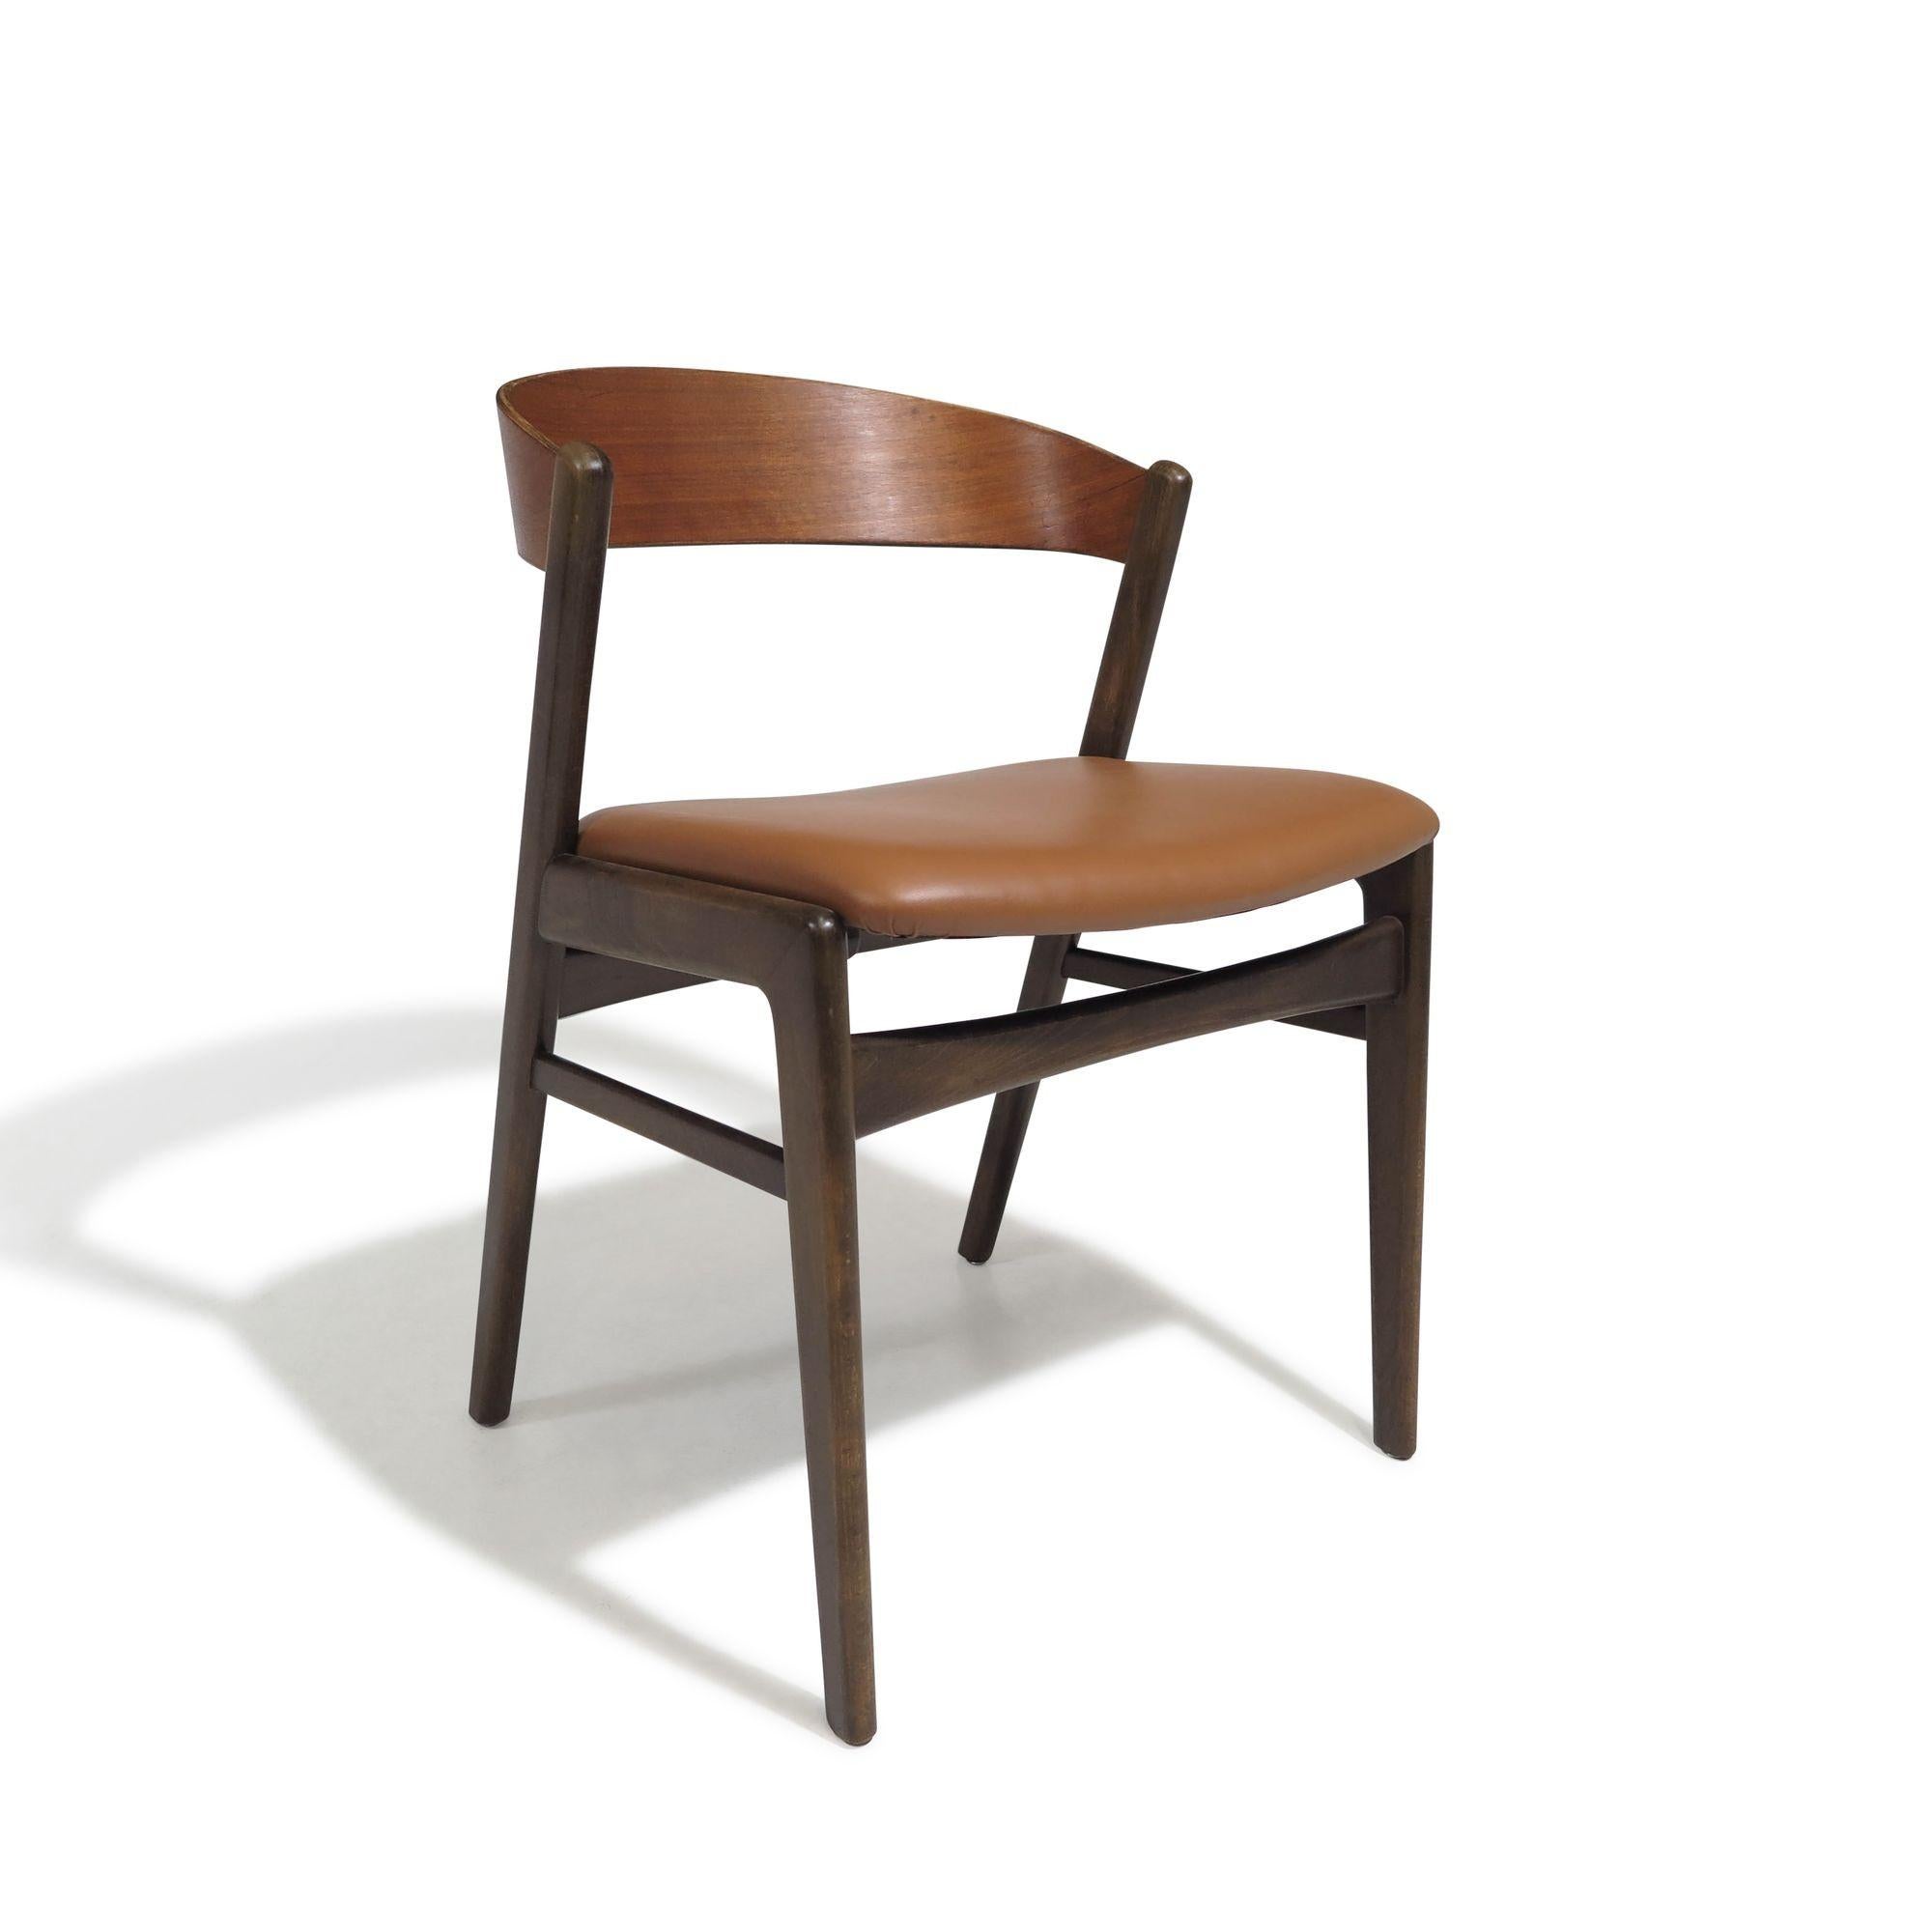 Set of eight mid-century Danish dining chairs designed by Folke Ohlsson (1919-2002) for Dux, 1965, Denmark. The chairs are crafted with dramatic walnut curved backrests and walnut stained beech frames. Newly upholstered seats in saddle